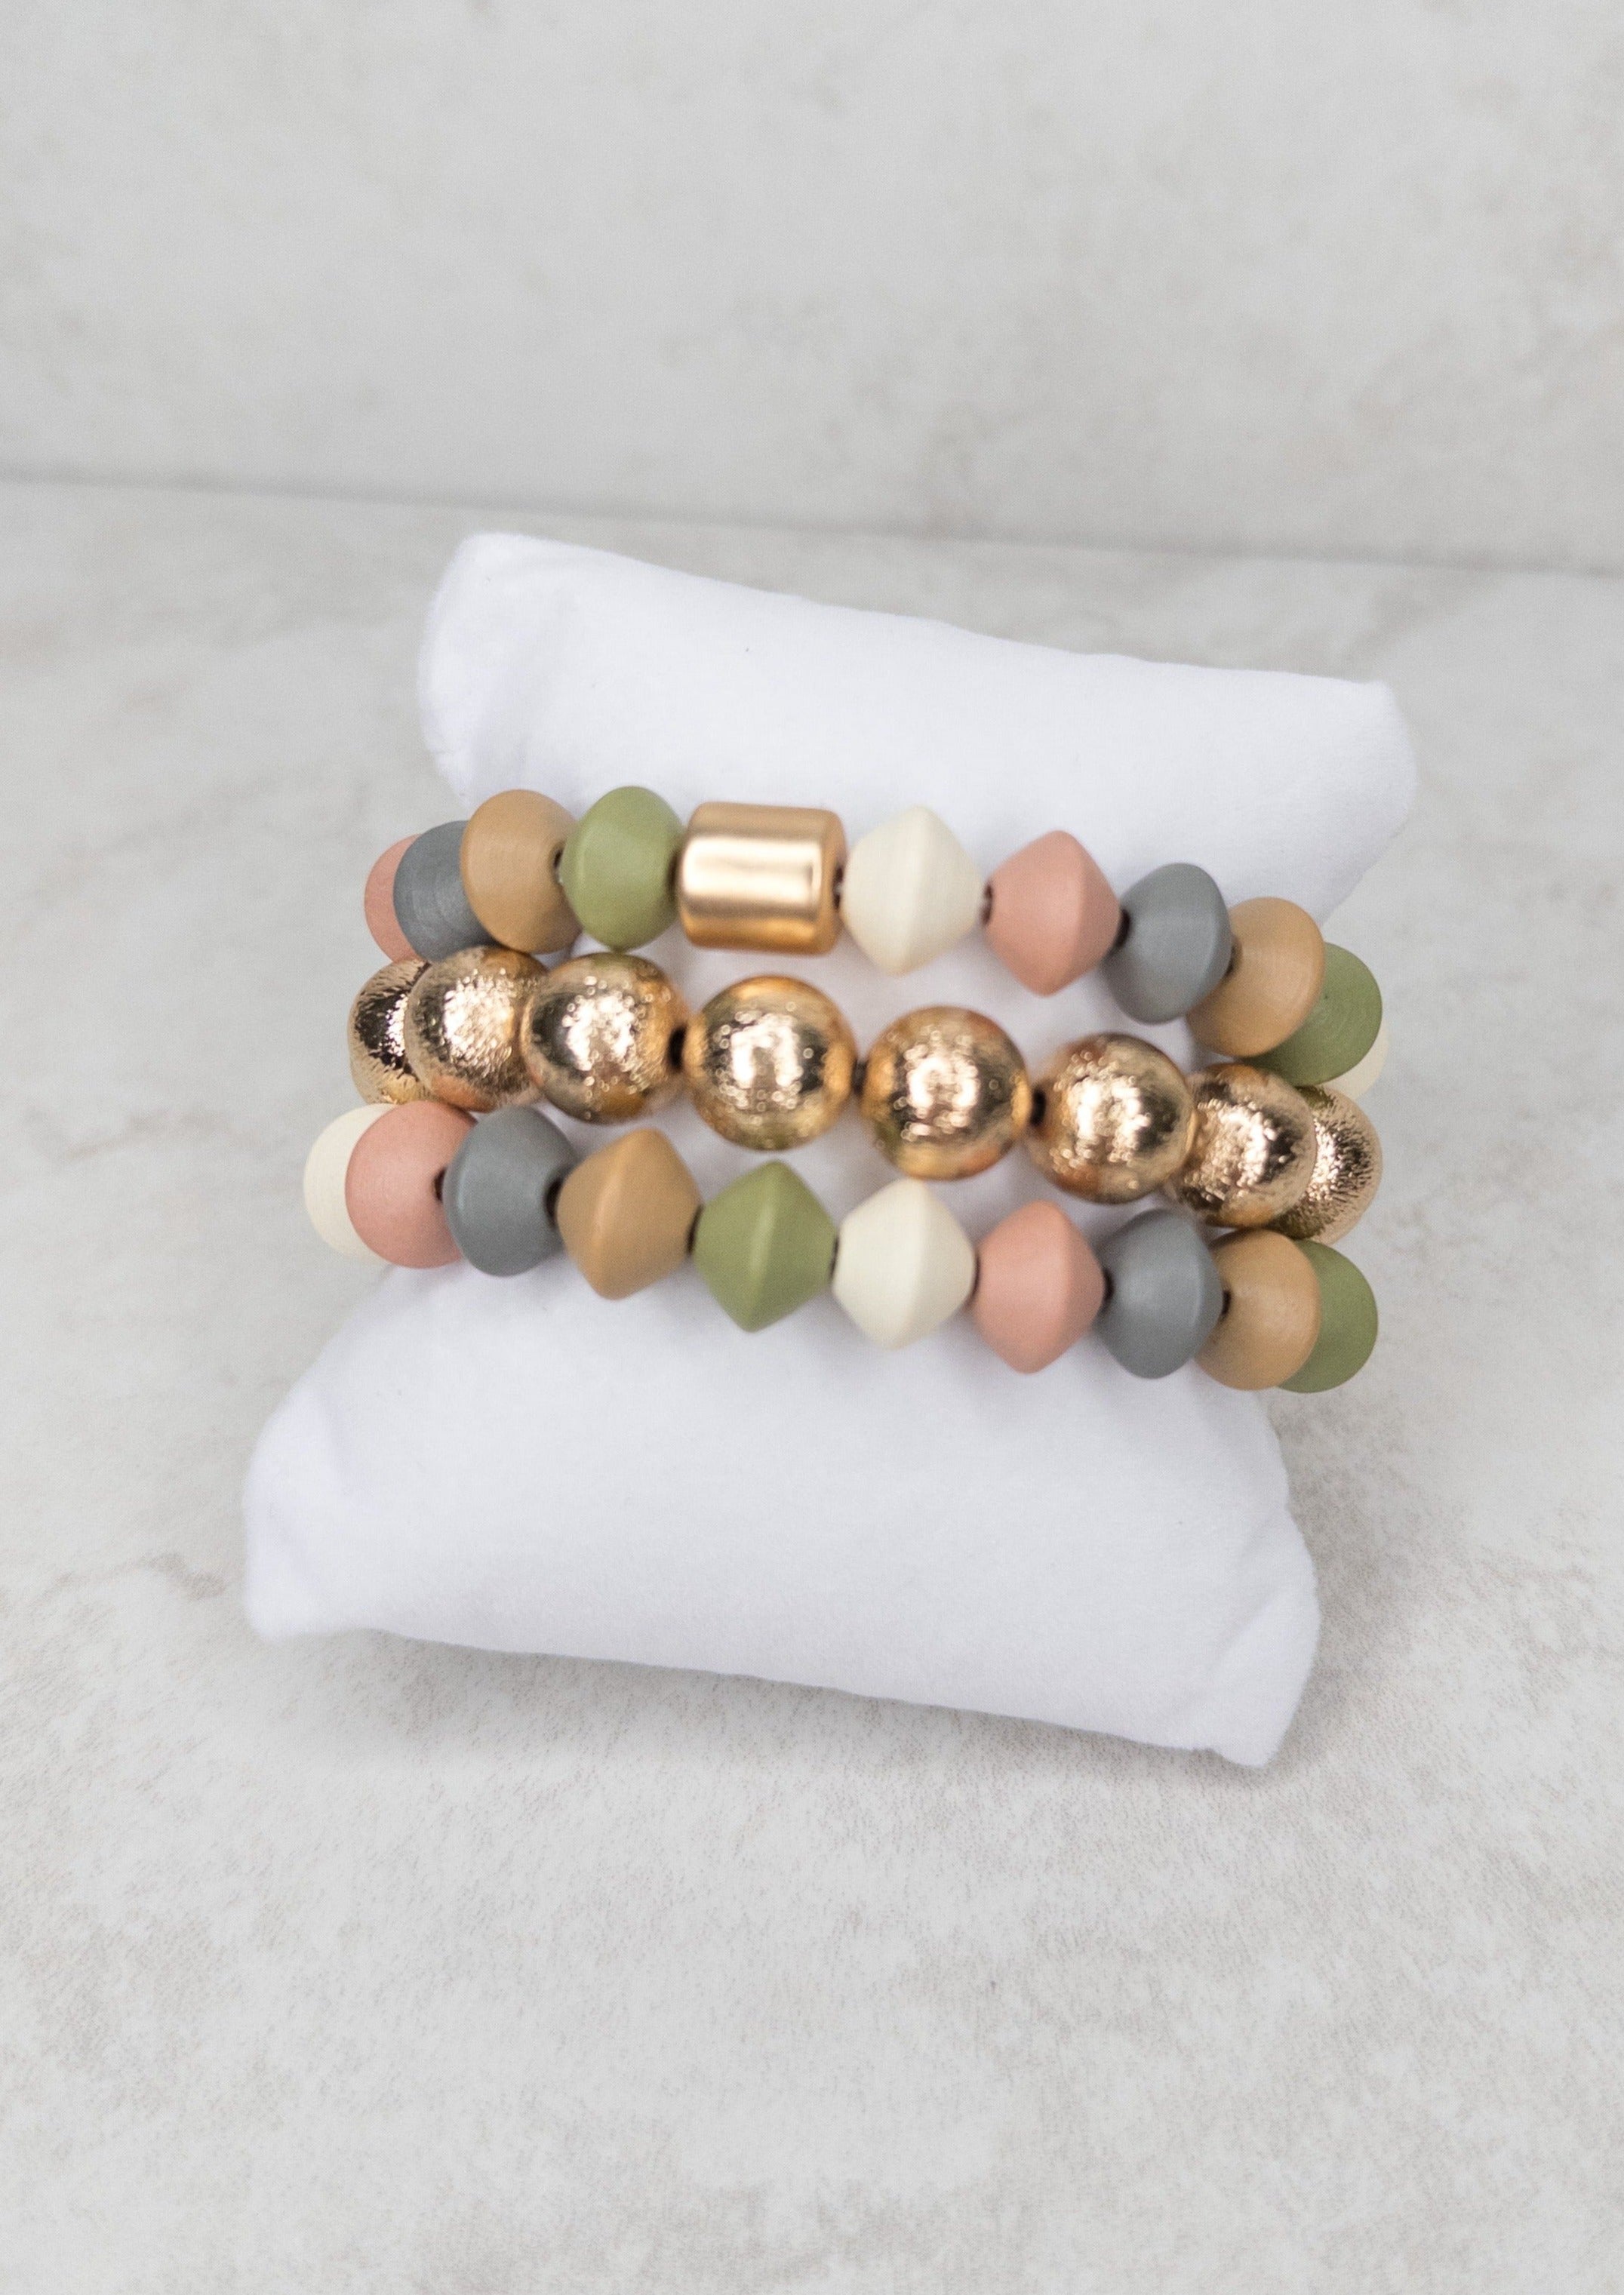 3 bracelets on a bracelet pillow. Top and bottom bracelet have pastel colored beads. The middle bracelet has round, gold beads.